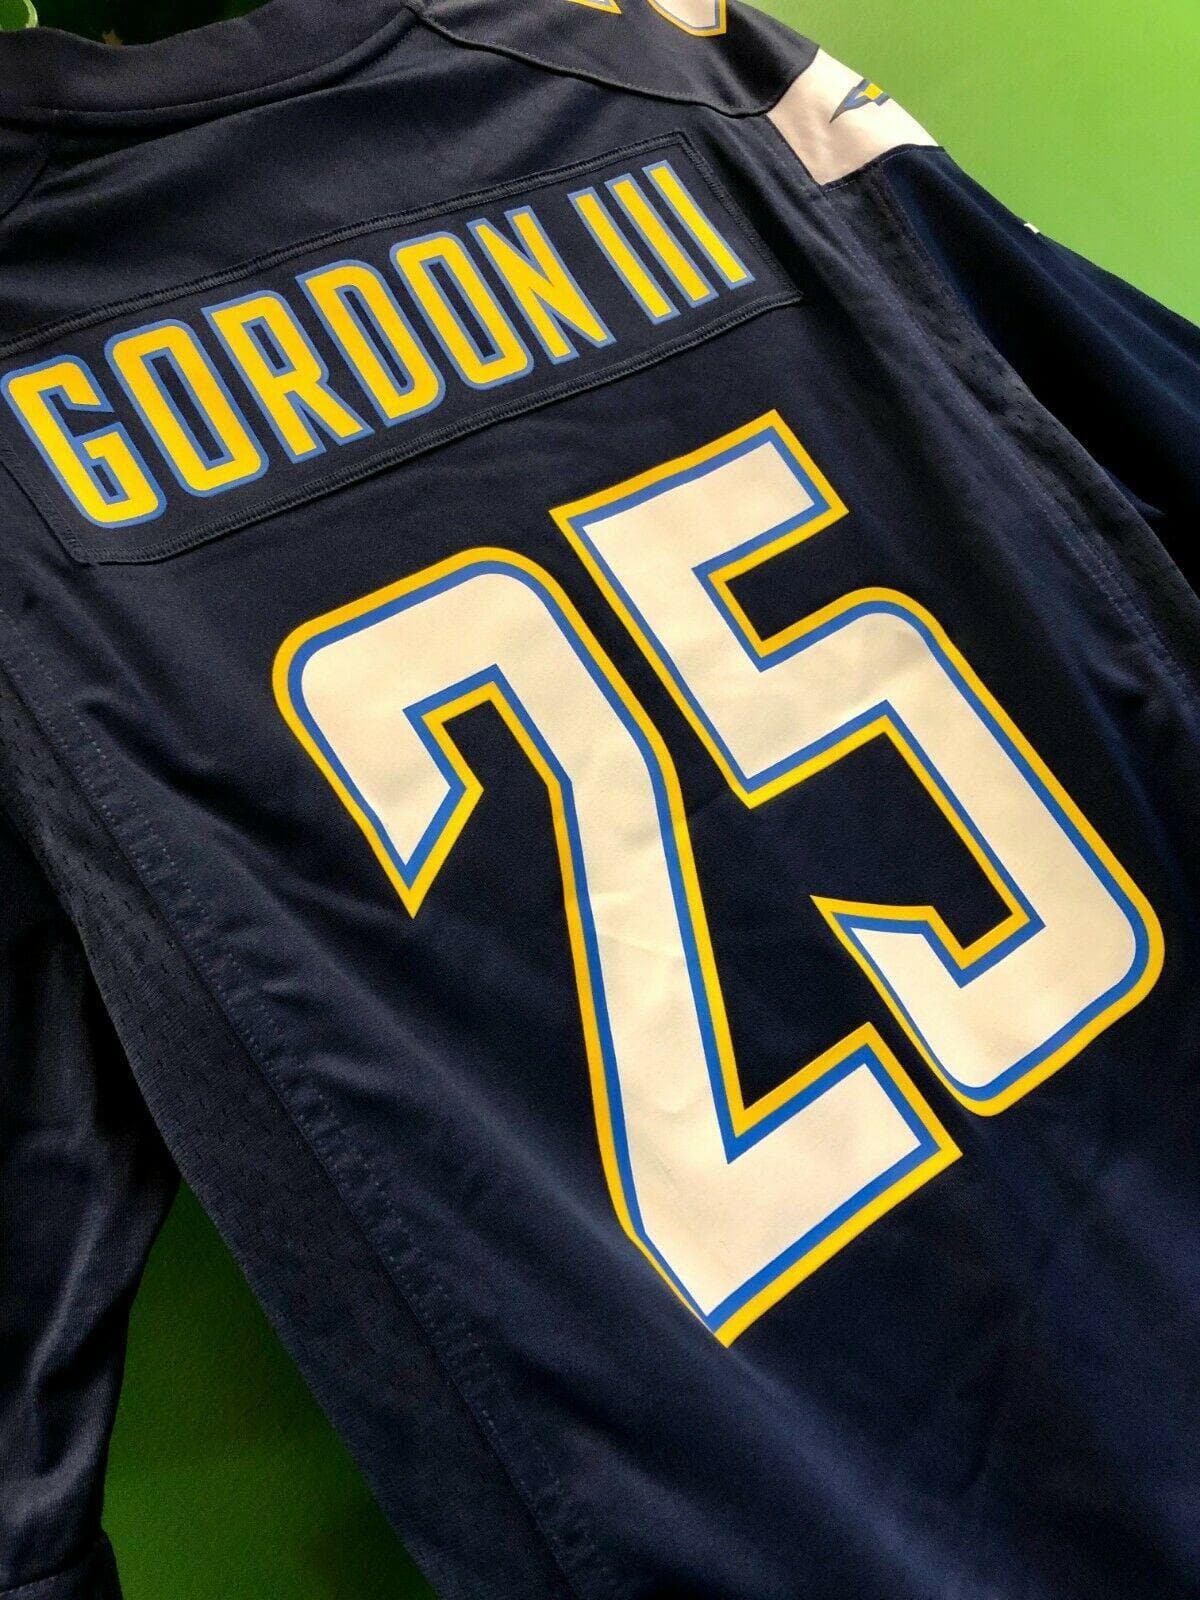 NFL Los Angeles Chargers Melvin Gordon III #25 Game Jersey Men's Medium NWT